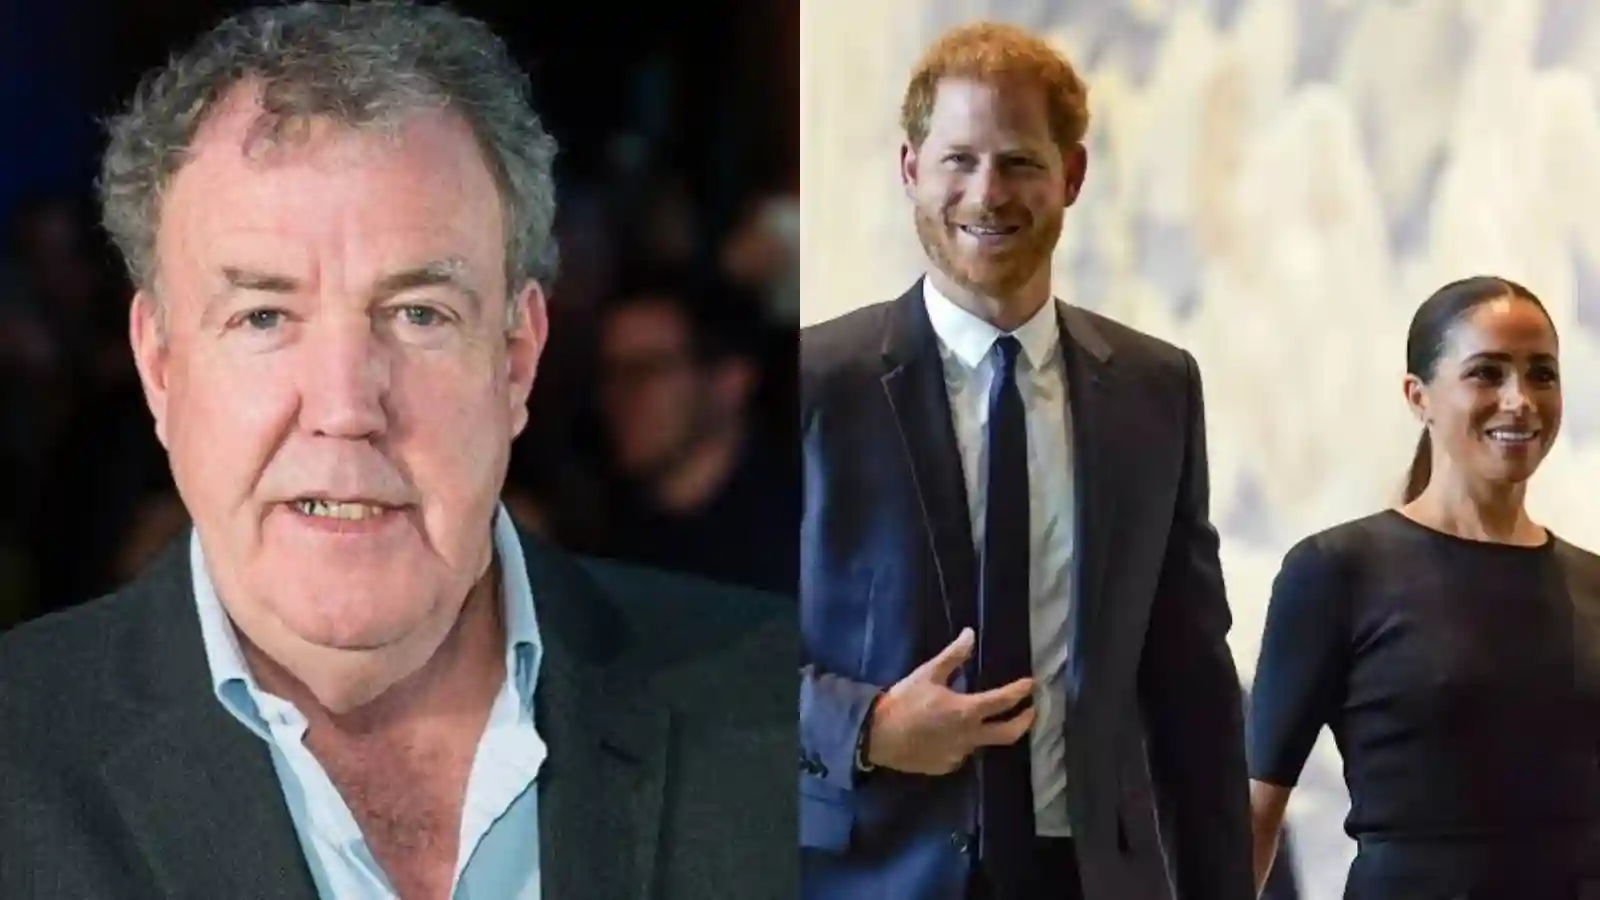 Jeremy Clarkson and The Sun have apologized for the Meghan Markle op-ed